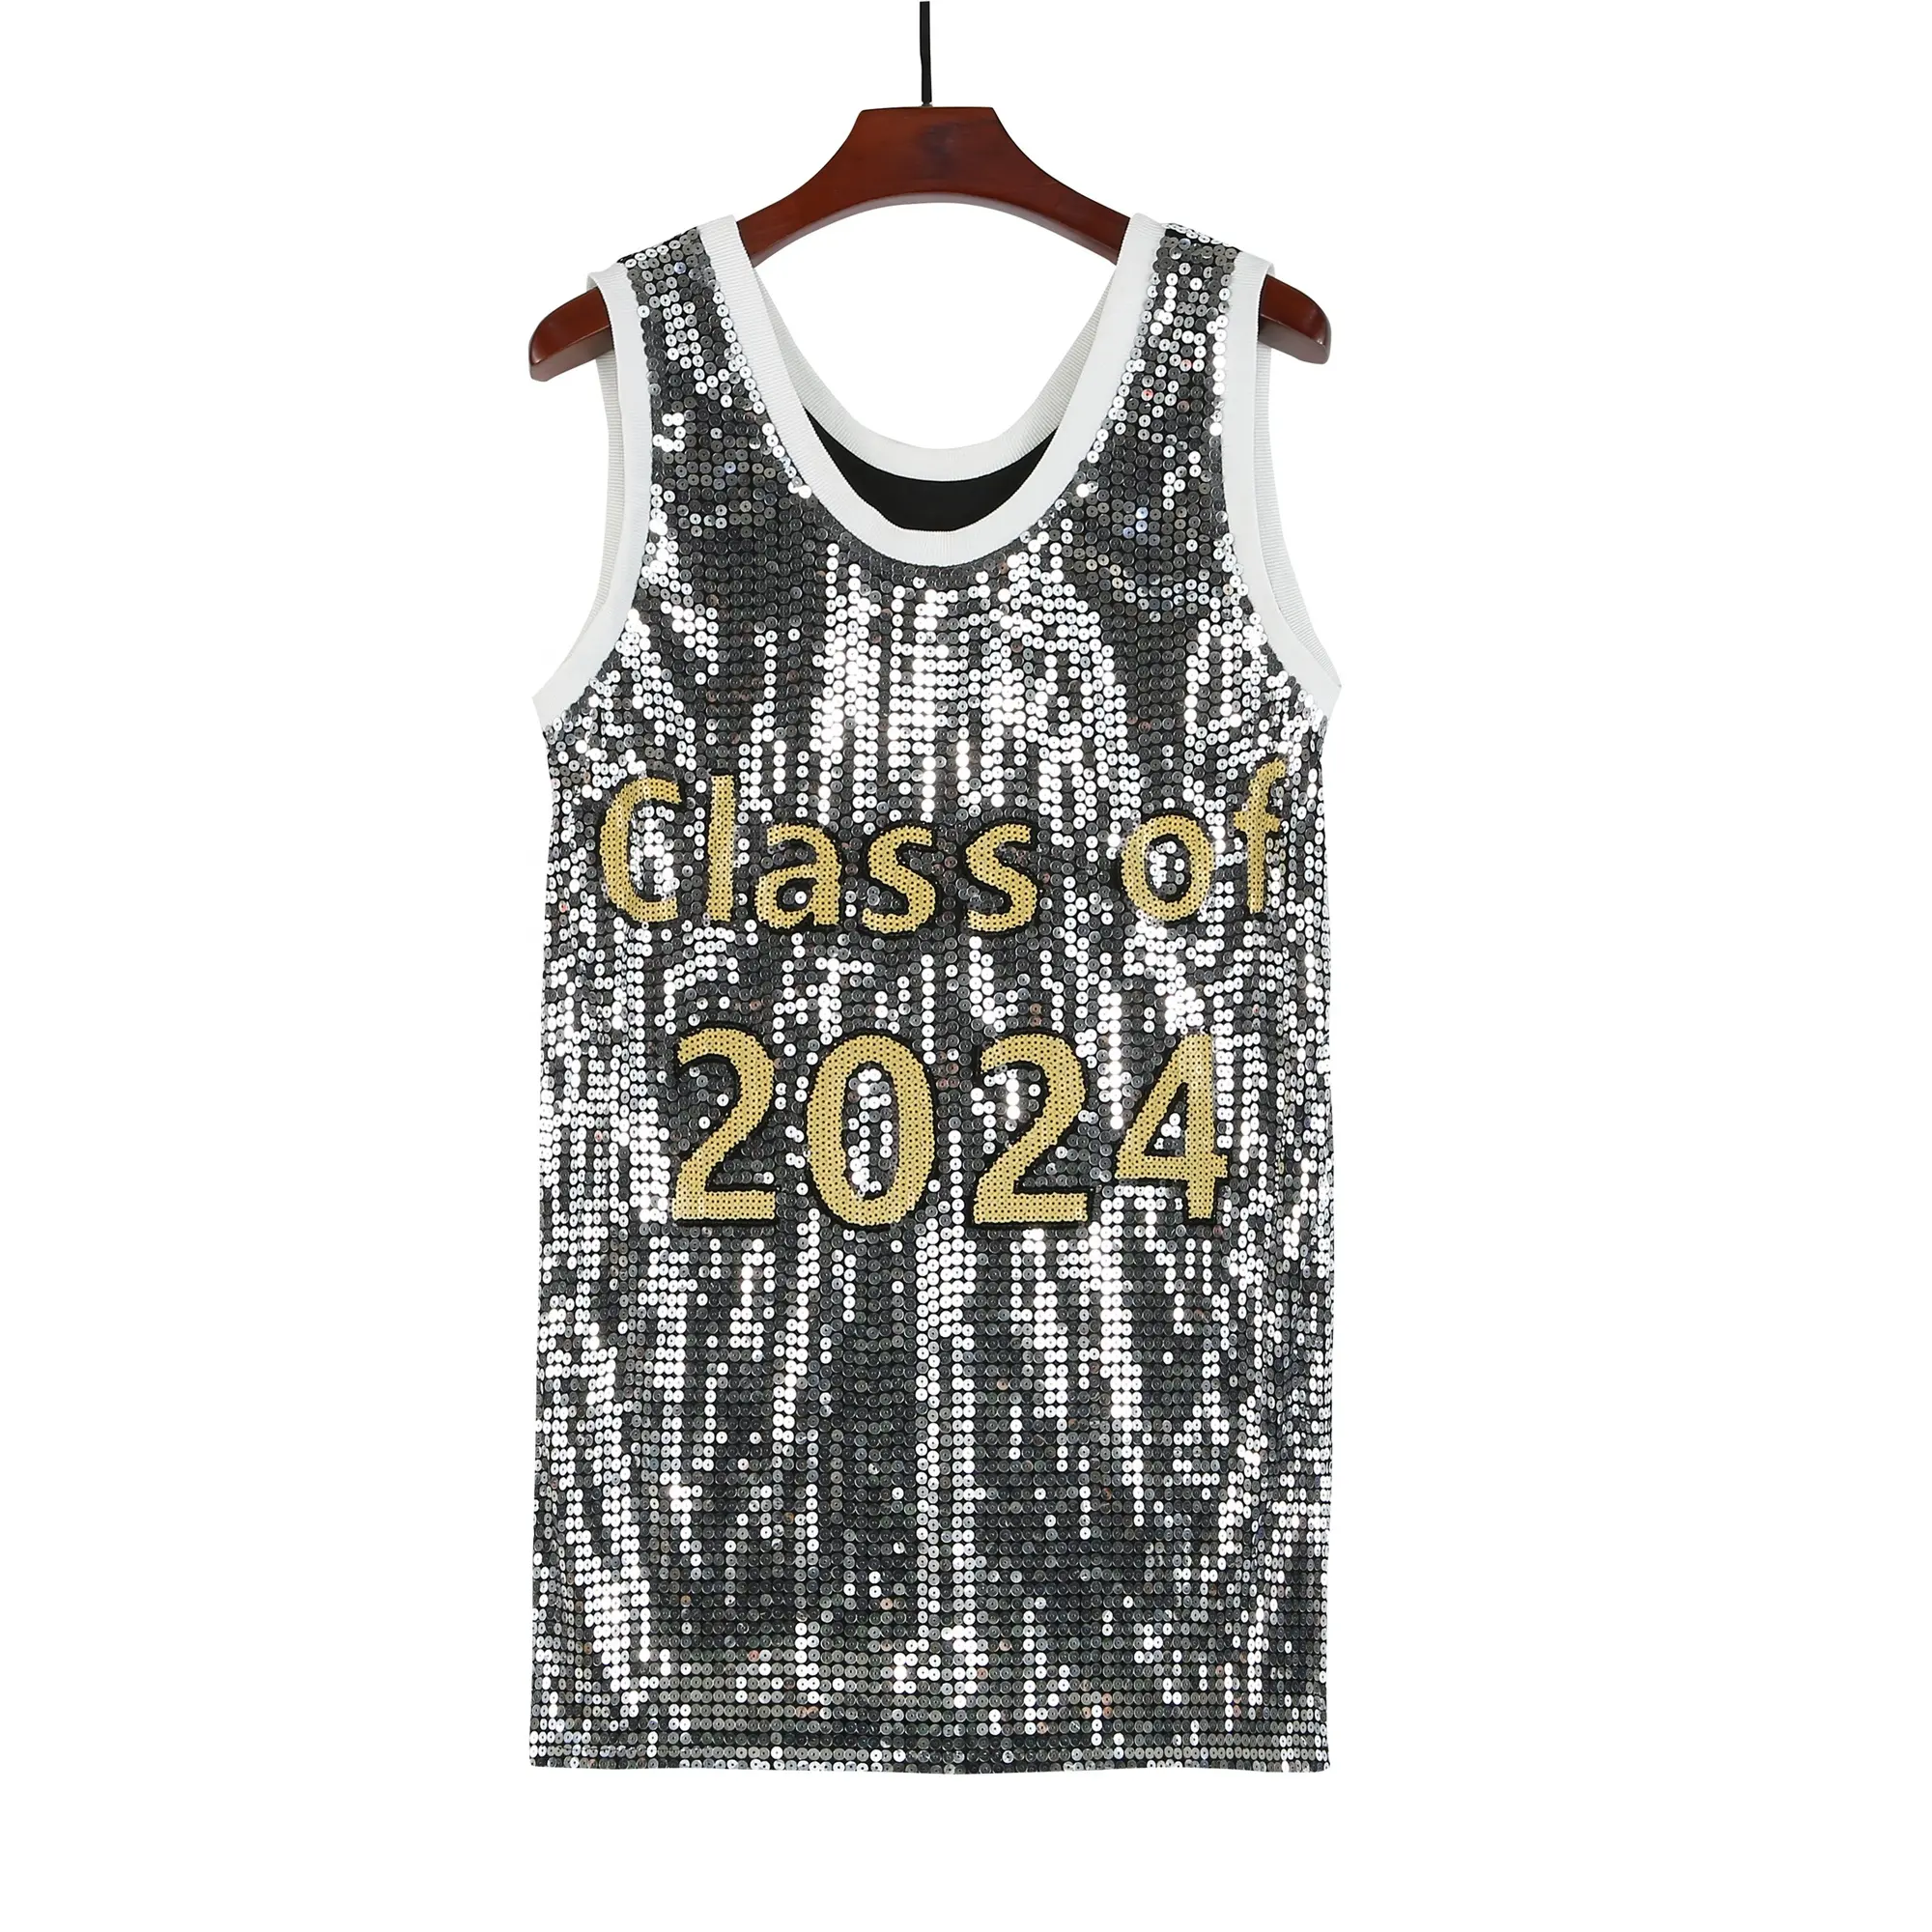 Tops con purpurina para mujer Top con lentejuelas Bling Neck Silver Sequined Tank Letter Top Camisa sin mangas